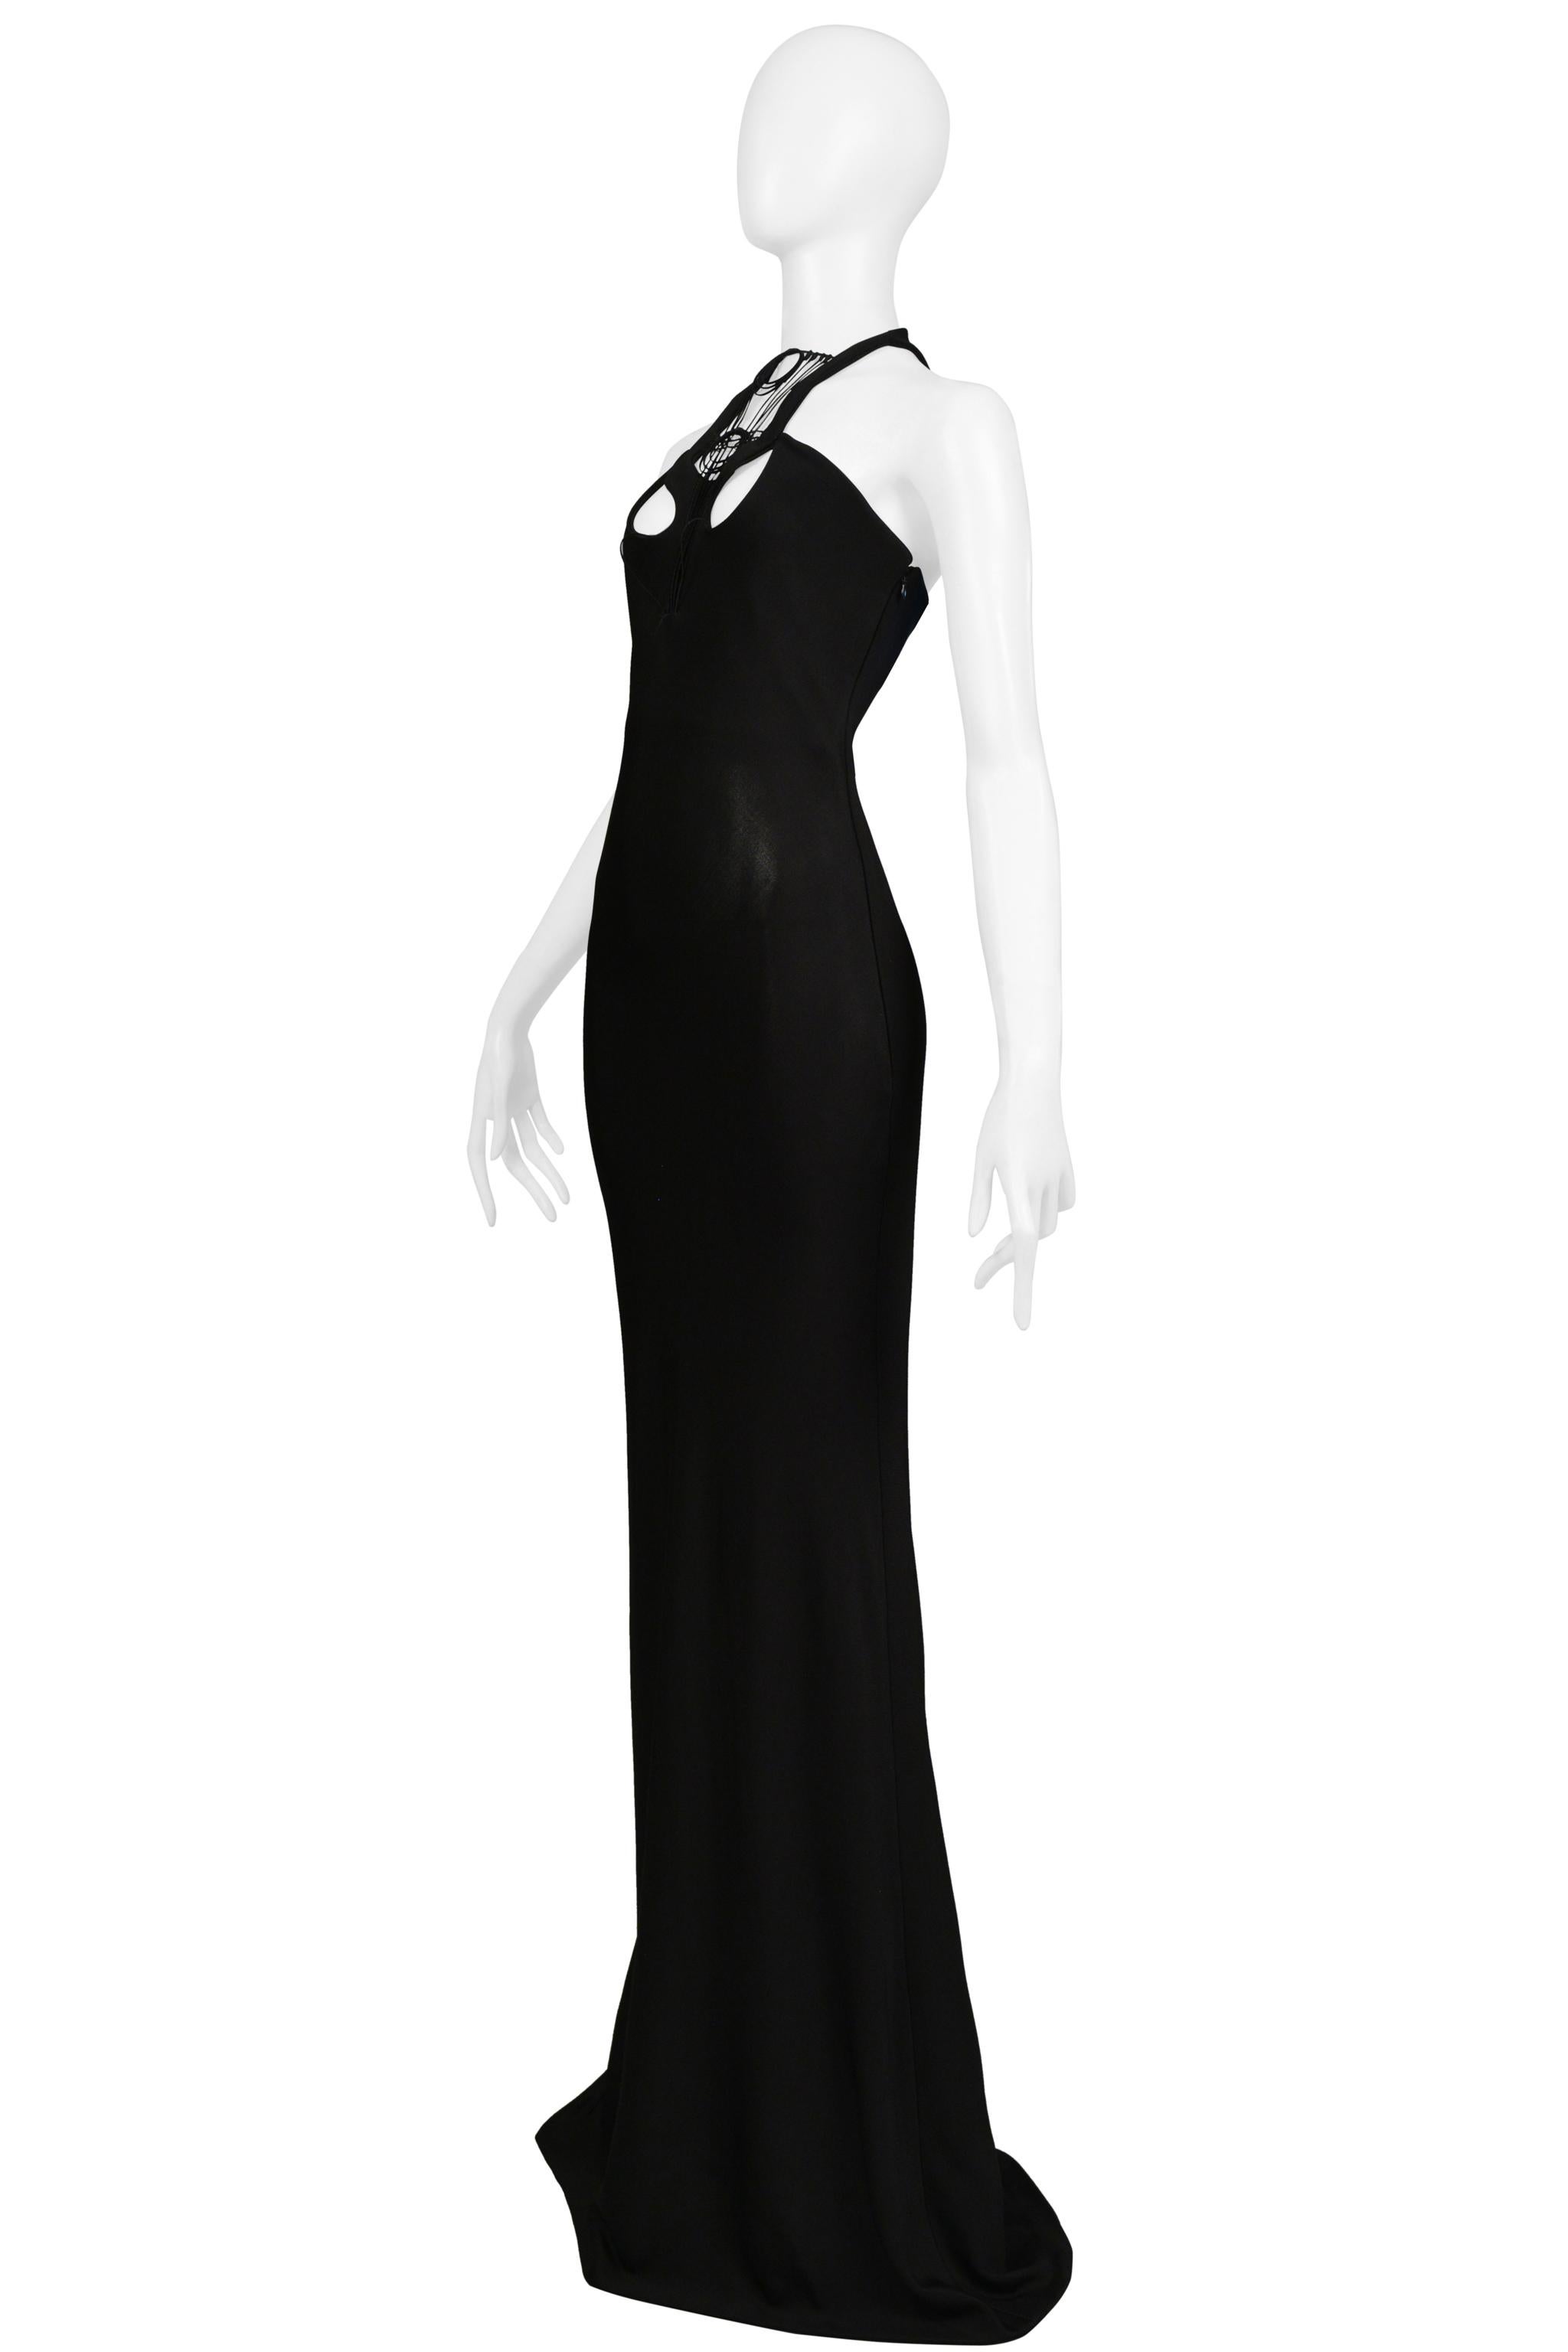 Sophia Kokosalaki Black Architectural Evening Gown With Intricate Bodice 2008 For Sale 1